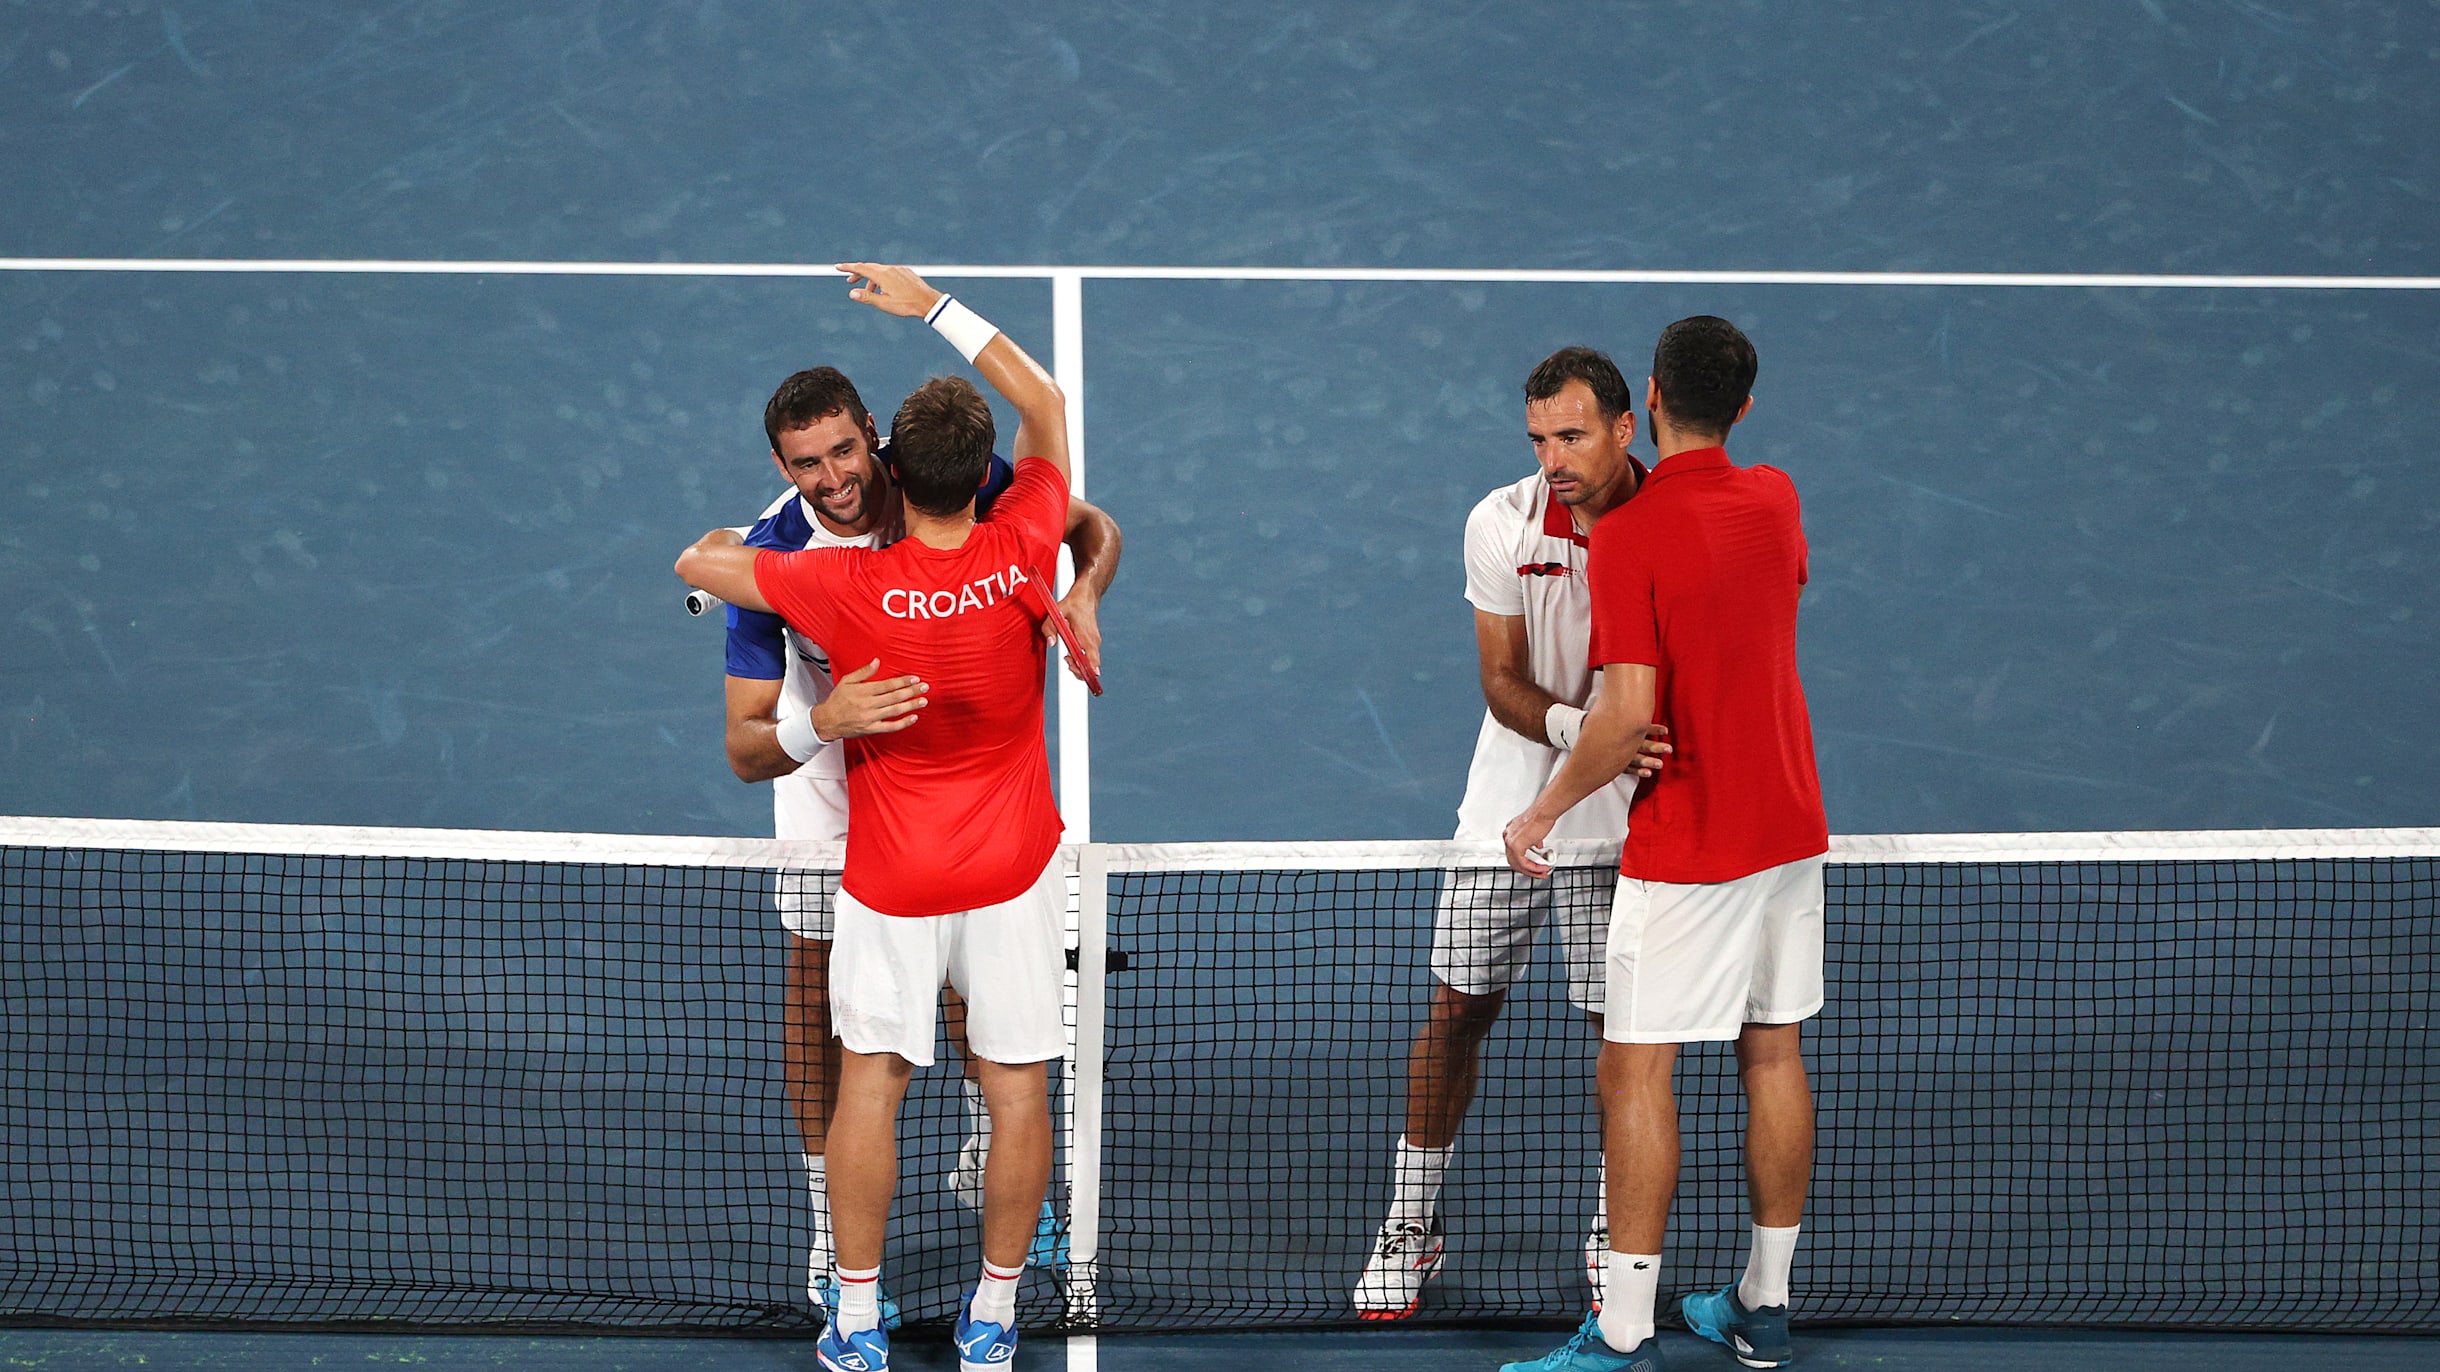 Double gold-silver for Croatia in mens doubles tennis; New Zealand edge Americans to bronze